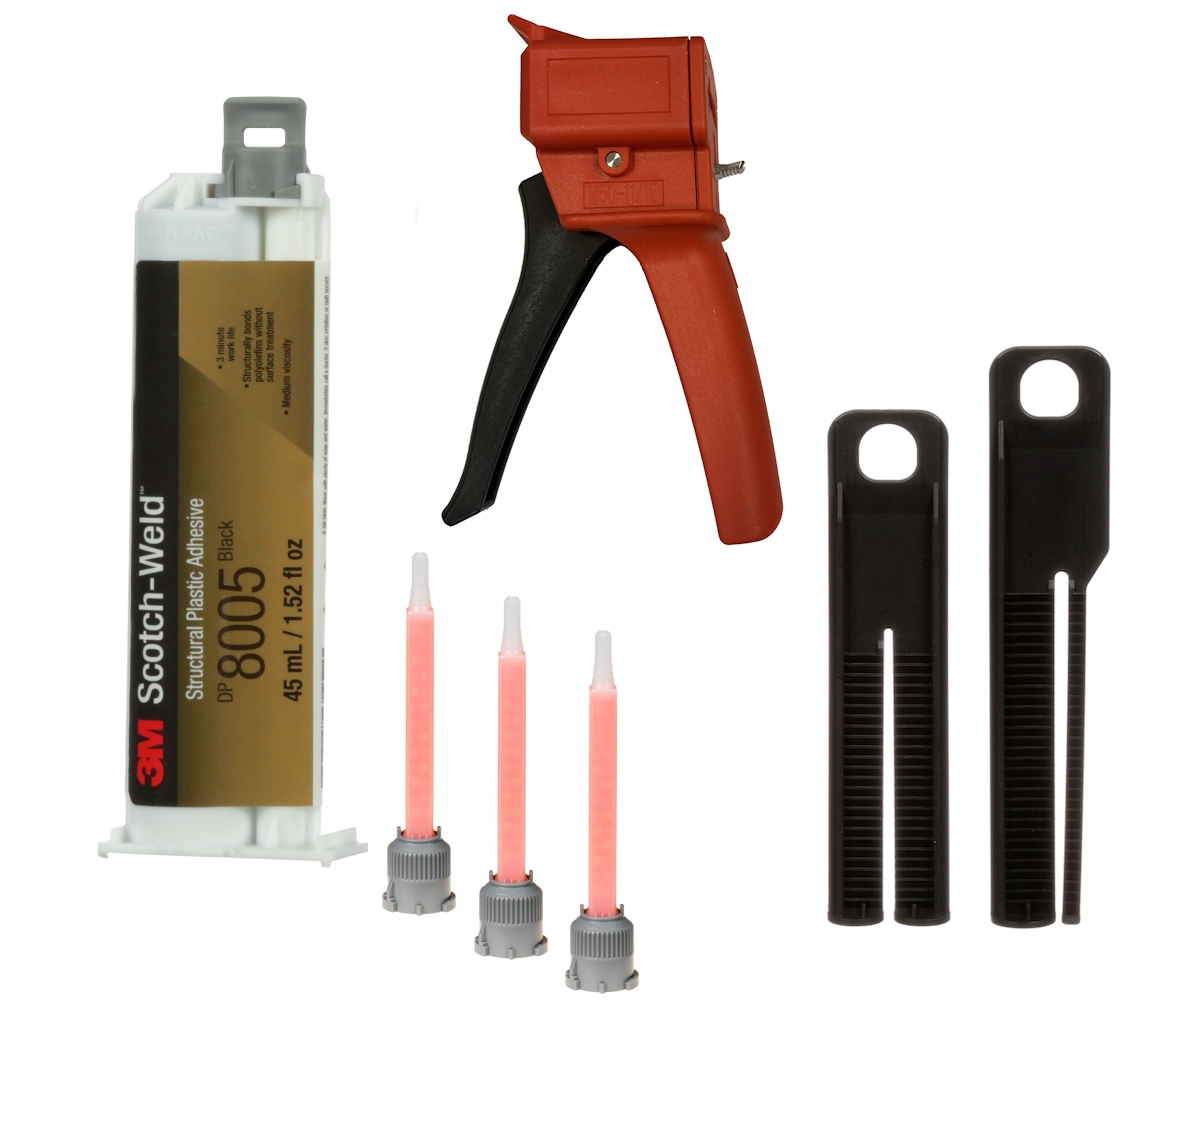 Starter set: 1x 3M Scotch-Weld 2-component construction adhesive EPX System DP8005, black, 45 ml 1x S-K-S hand tool for EPX 38 to 50 ml cartridges incl. feed piston 2:1